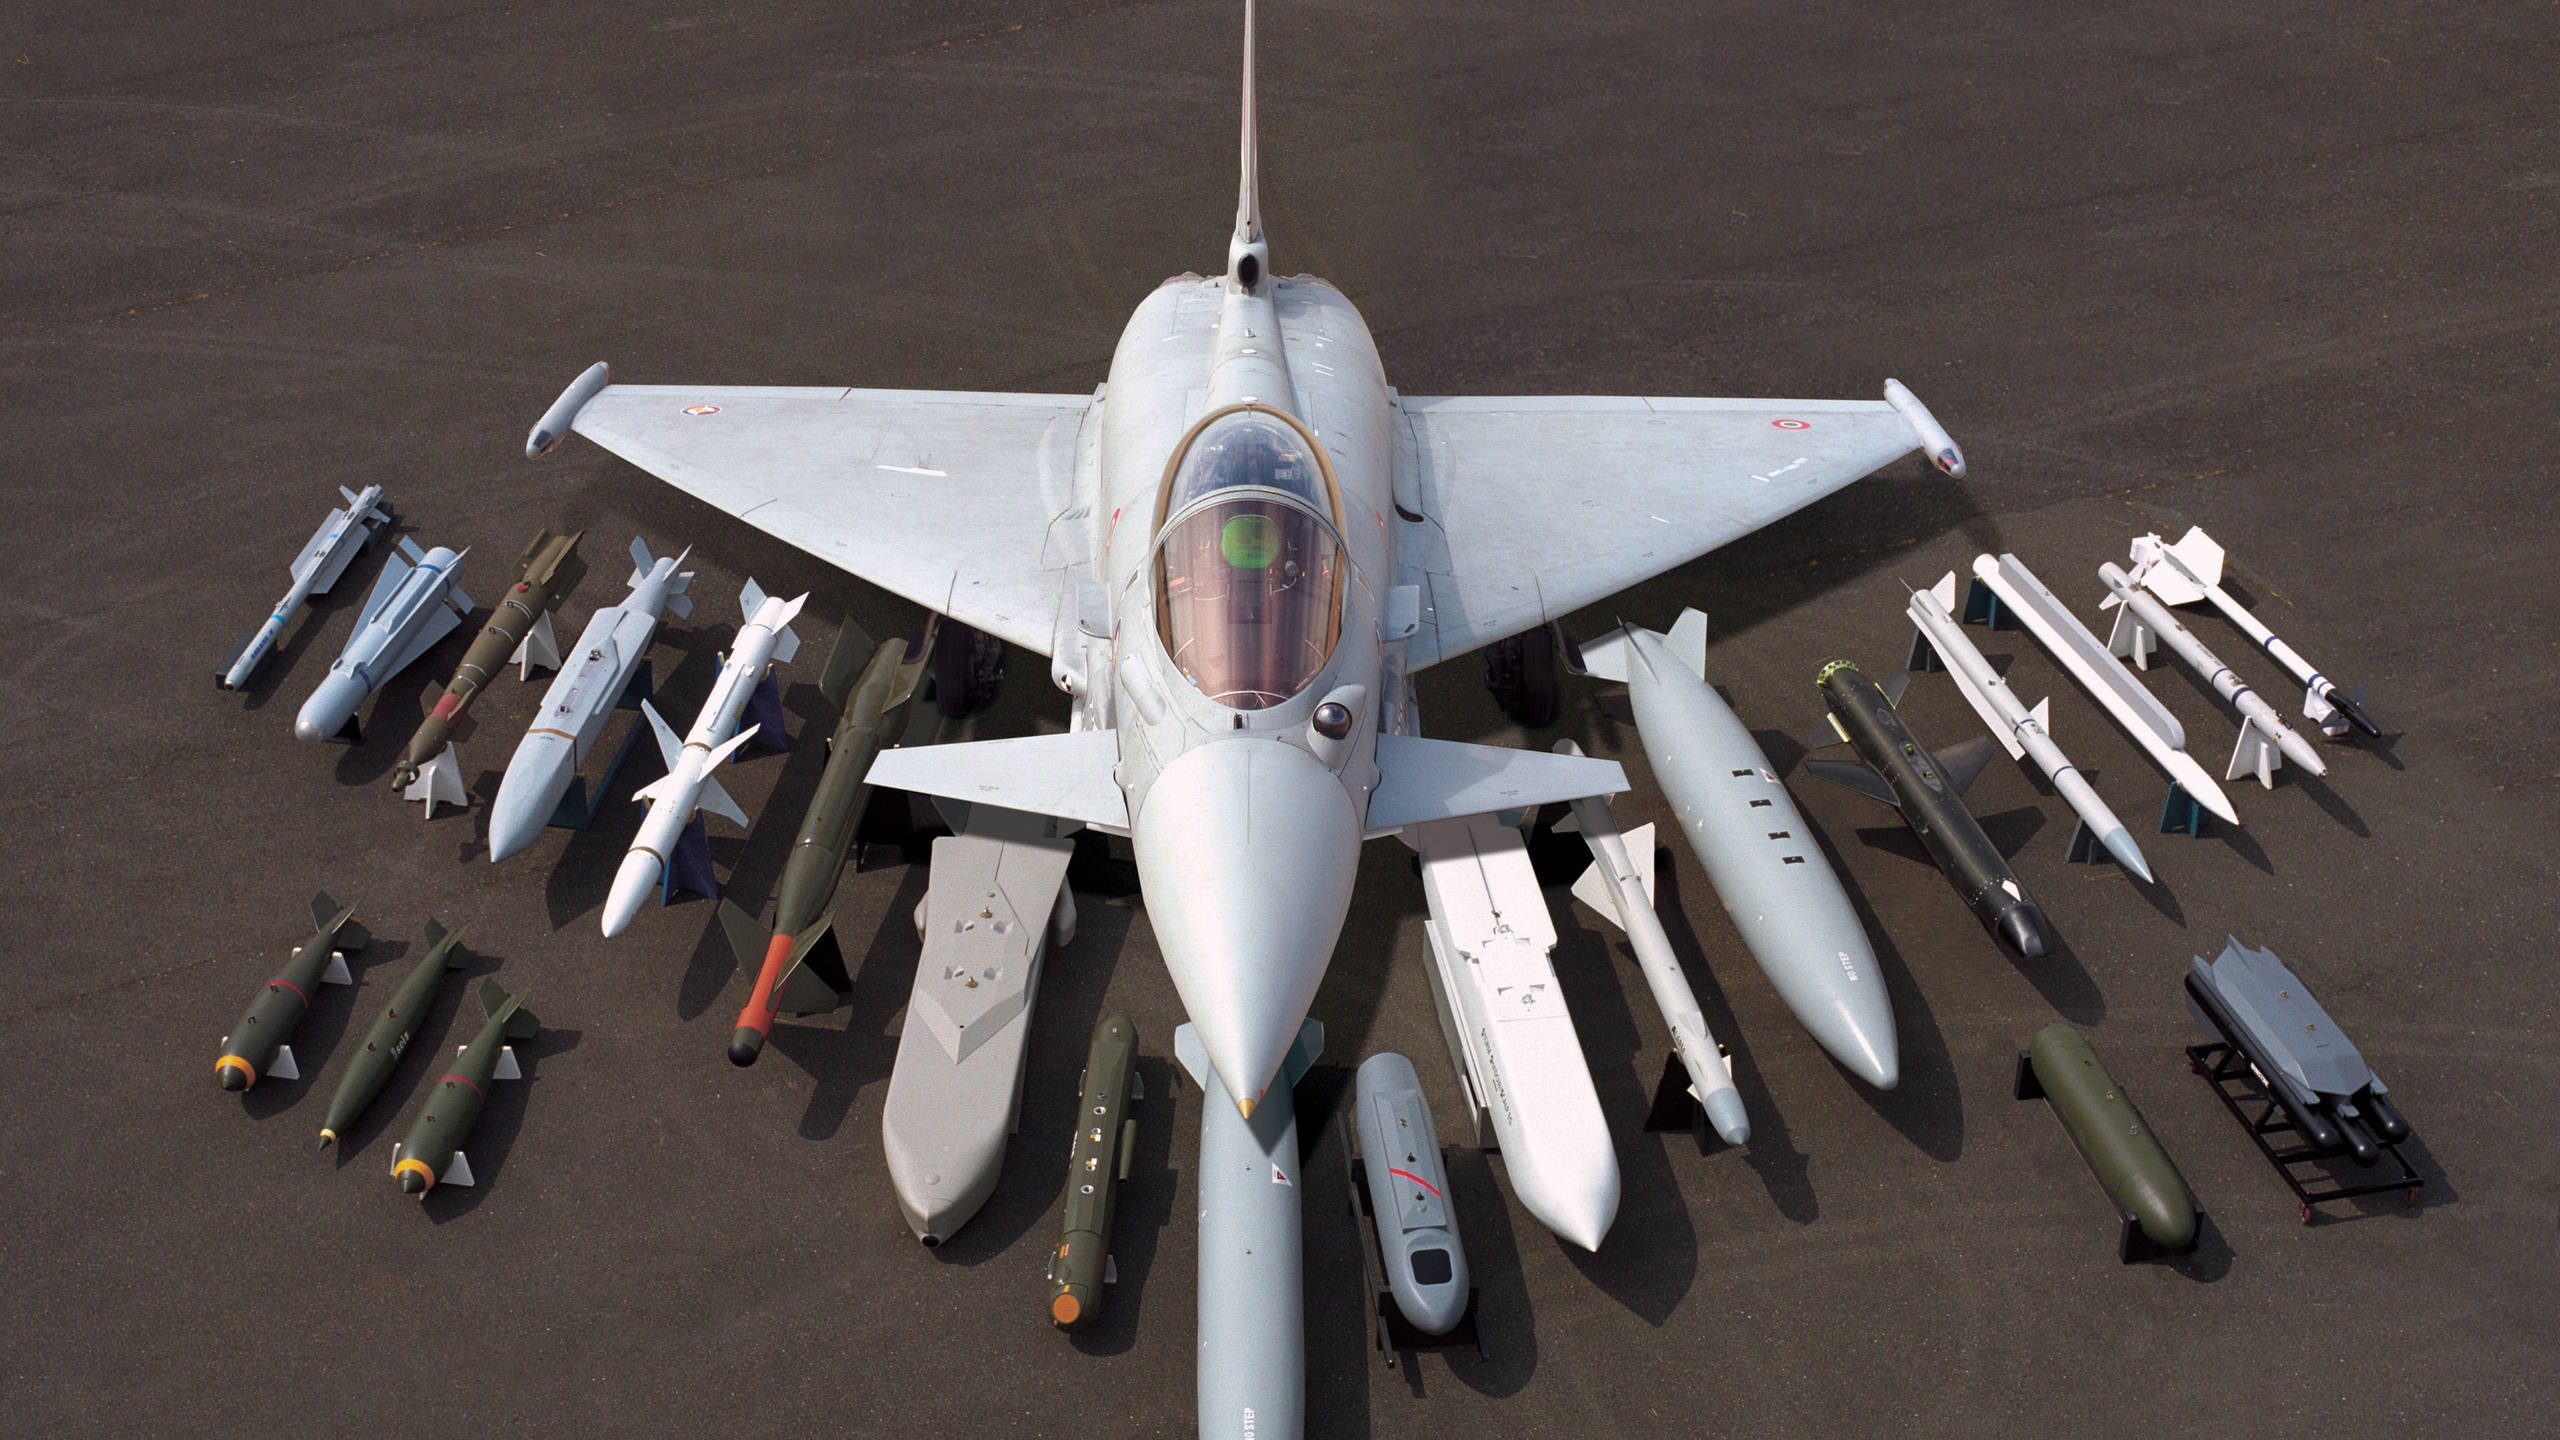 General 2560x1440 Eurofighter Typhoon military aircraft military aircraft vehicle military vehicle